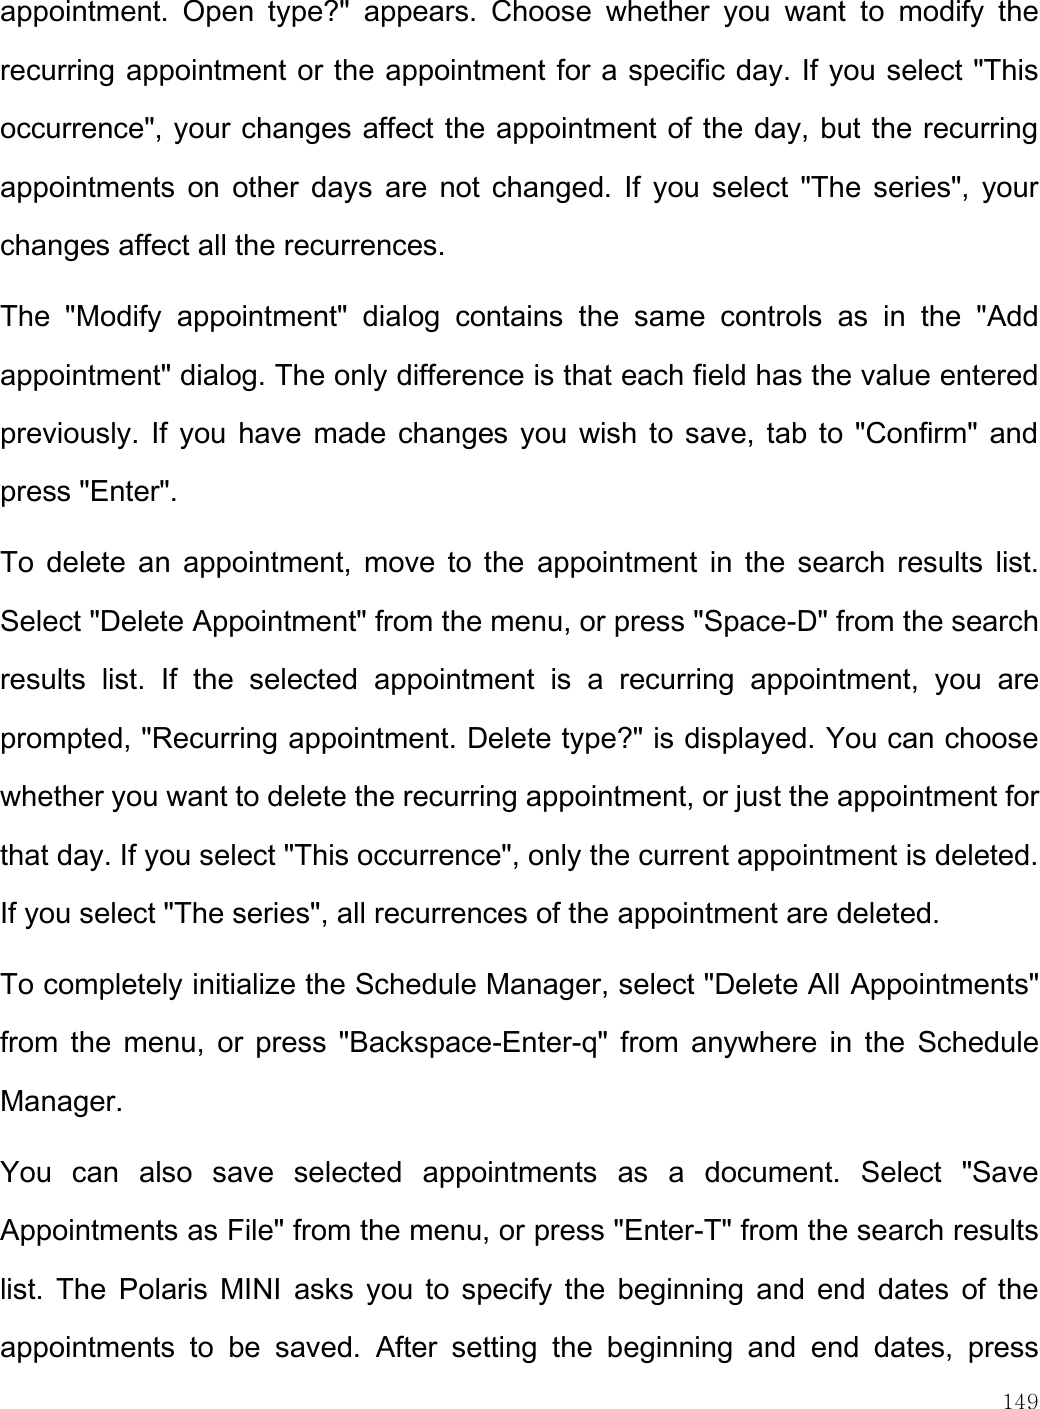    149  appointment.  Open  type?&quot;  appears.  Choose  whether  you  want  to  modify  the recurring appointment or the appointment for a specific day. If you select &quot;This occurrence&quot;, your changes affect the appointment of the day, but the recurring appointments on  other  days are  not  changed.  If you select  &quot;The  series&quot;,  your changes affect all the recurrences.  The  &quot;Modify  appointment&quot;  dialog  contains  the  same  controls  as  in  the  &quot;Add appointment&quot; dialog. The only difference is that each field has the value entered previously. If  you have made changes you wish to save, tab to &quot;Confirm&quot; and press &quot;Enter&quot;.  To  delete  an appointment,  move  to  the  appointment  in  the search  results  list. Select &quot;Delete Appointment&quot; from the menu, or press &quot;Space-D&quot; from the search results  list.  If  the  selected  appointment  is  a  recurring  appointment,  you  are prompted, &quot;Recurring appointment. Delete type?&quot; is displayed. You can choose whether you want to delete the recurring appointment, or just the appointment for that day. If you select &quot;This occurrence&quot;, only the current appointment is deleted. If you select &quot;The series&quot;, all recurrences of the appointment are deleted.  To completely initialize the Schedule Manager, select &quot;Delete All Appointments&quot; from  the  menu,  or  press  &quot;Backspace-Enter-q&quot;  from anywhere in  the  Schedule Manager.  You  can  also  save  selected  appointments  as  a  document.  Select  &quot;Save Appointments as File&quot; from the menu, or press &quot;Enter-T&quot; from the search results list.  The  Polaris MINI  asks you  to  specify  the  beginning  and  end dates  of  the appointments  to  be  saved.  After  setting  the  beginning  and  end  dates,  press 